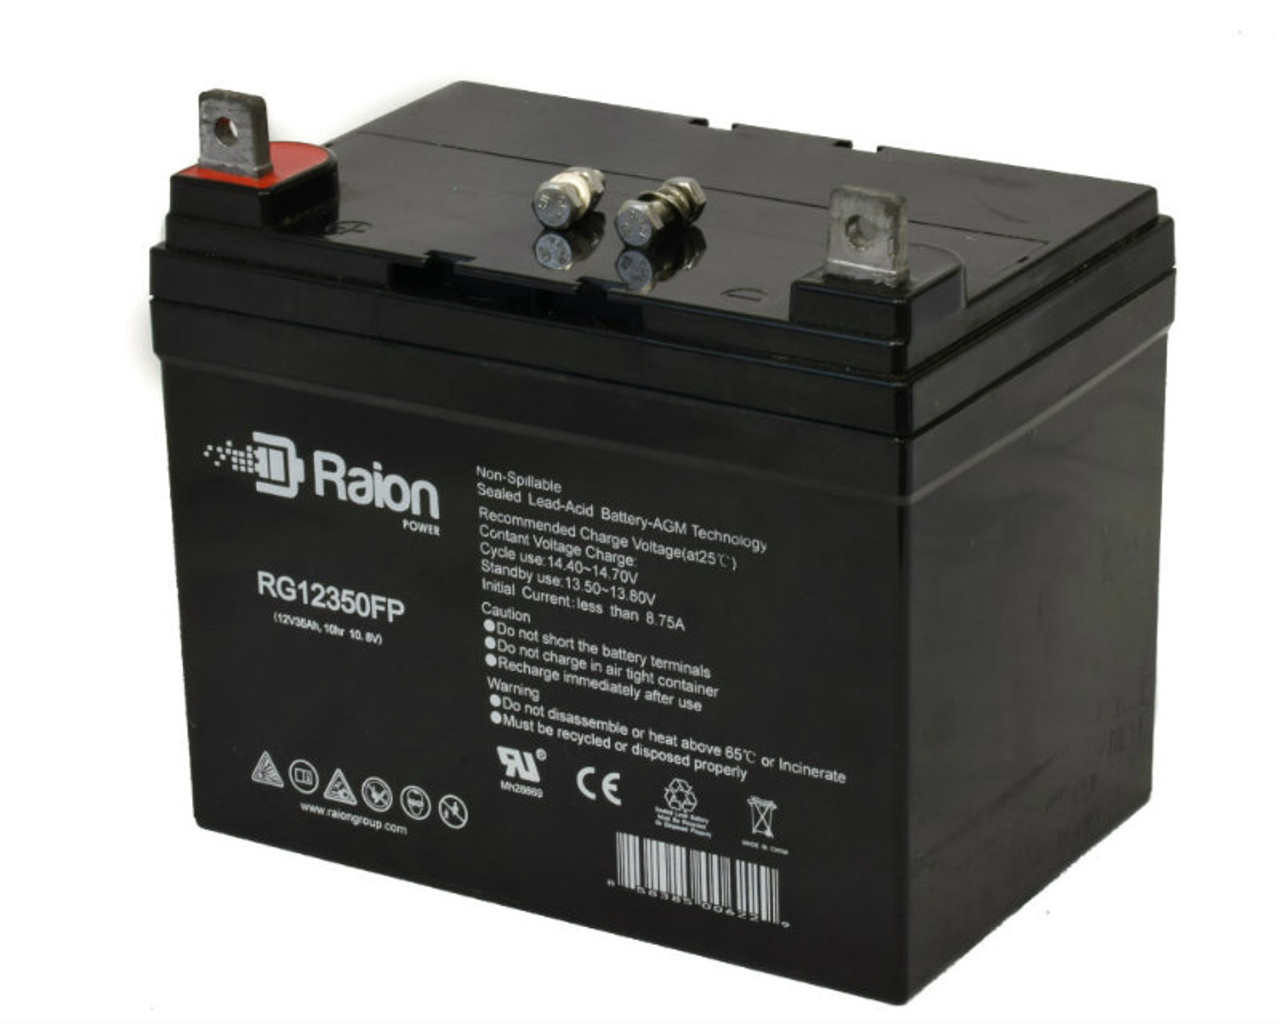 Raion Power Replacement 12V 35Ah RG12350FP Mobility Scooter Battery for Electric Mobility UltraLite Scooter Model 105